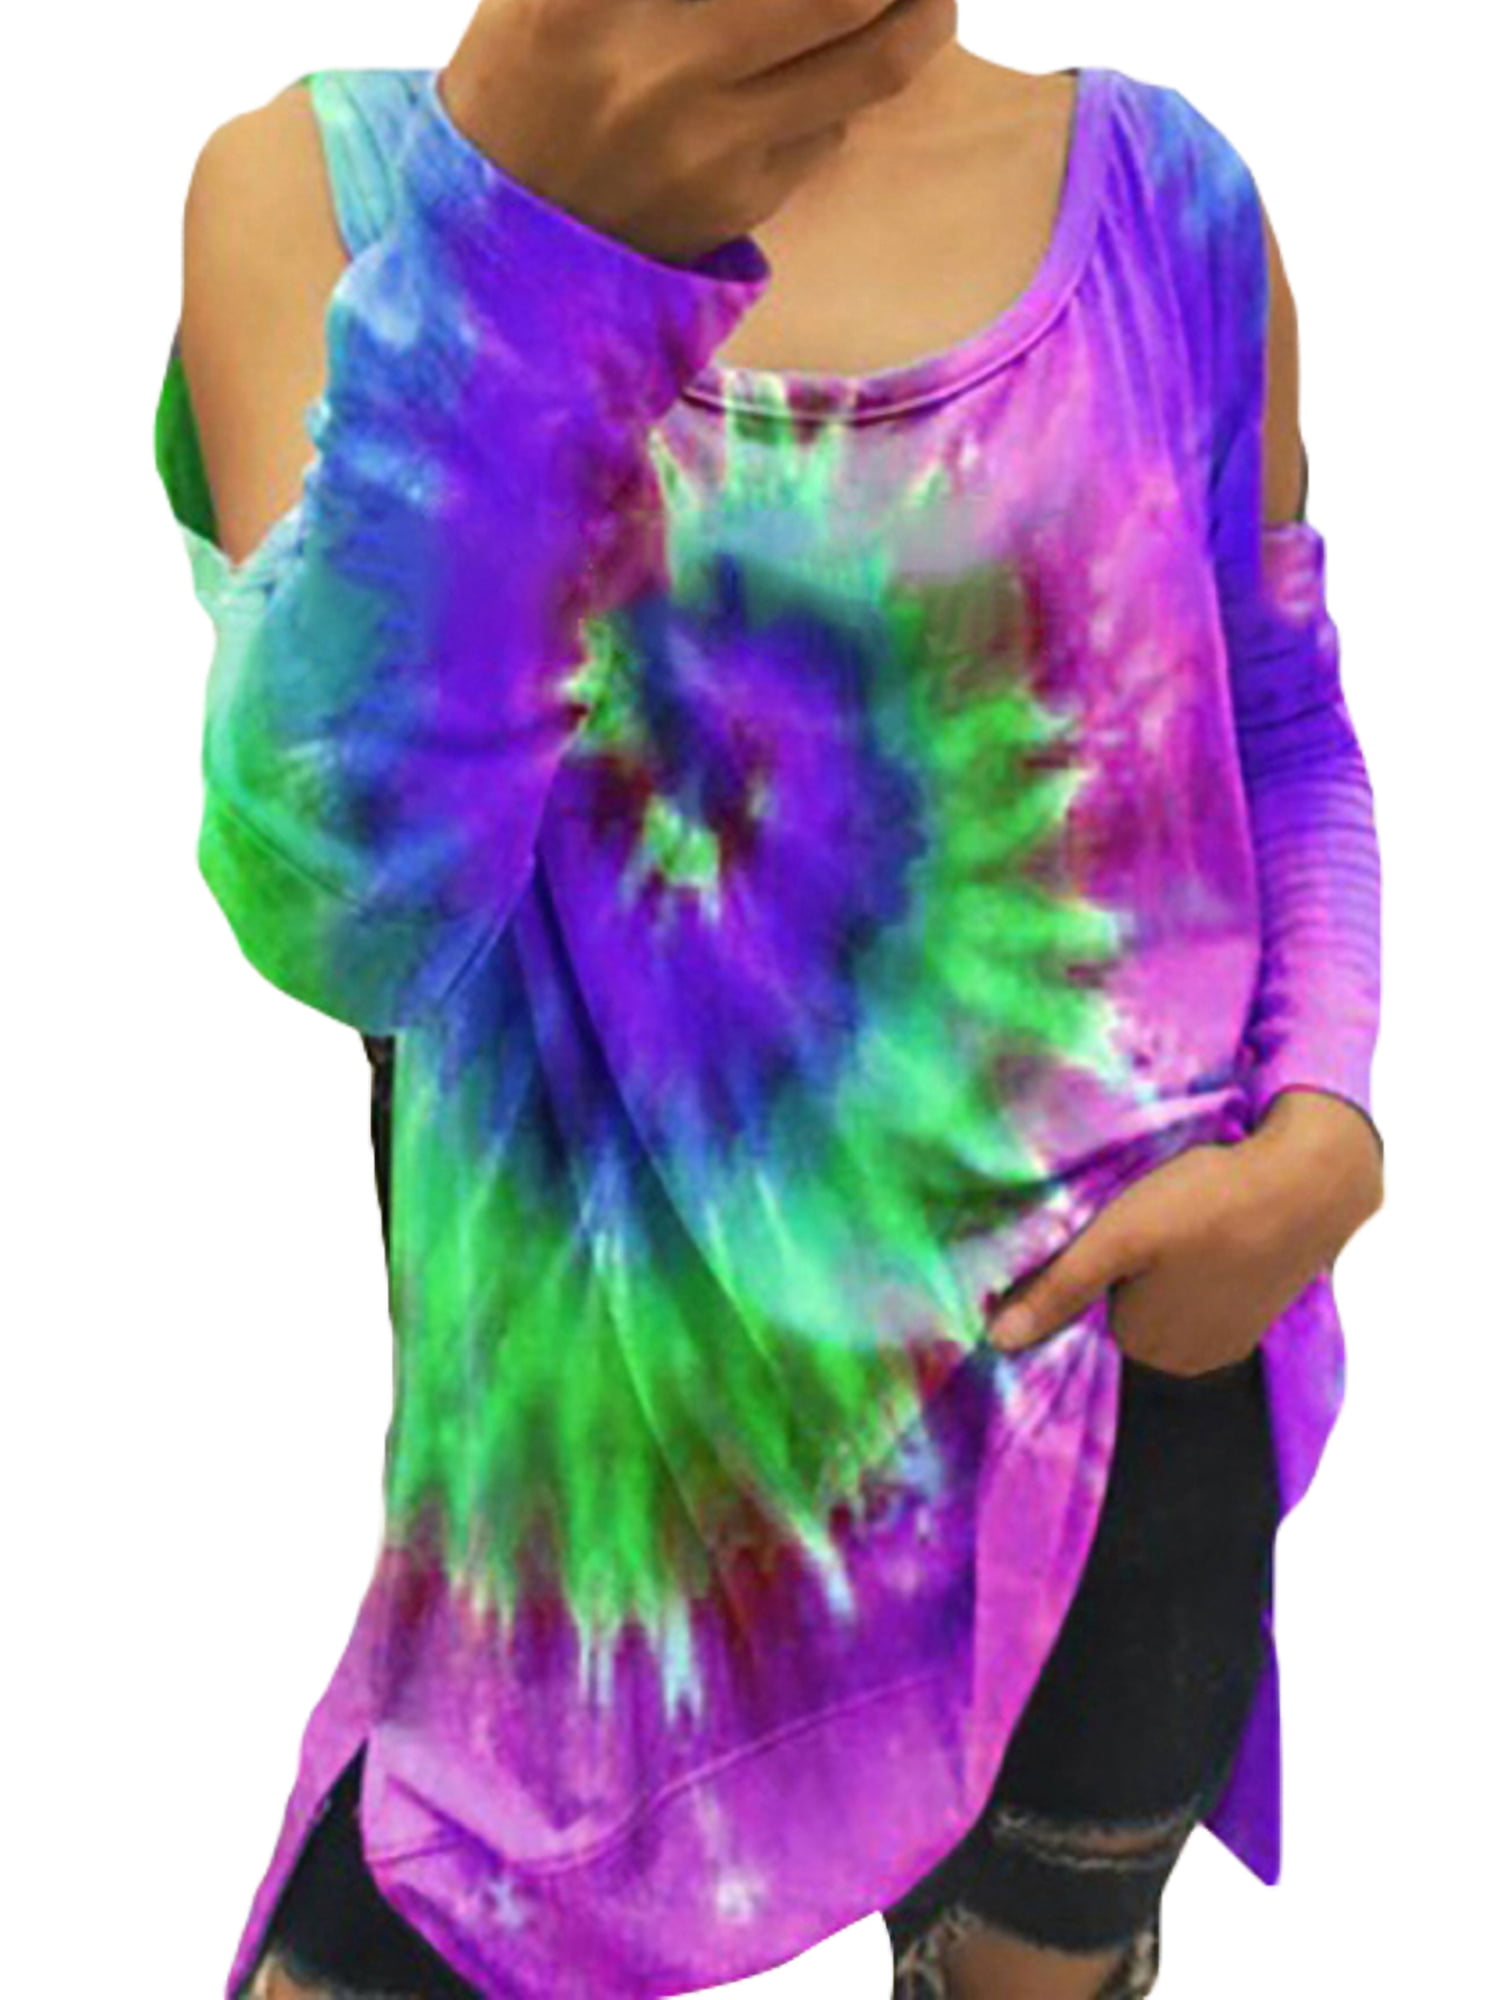 Plus Size Long Sleeve Top for Women Tie Dye Gradient Color Tee Shirts ...